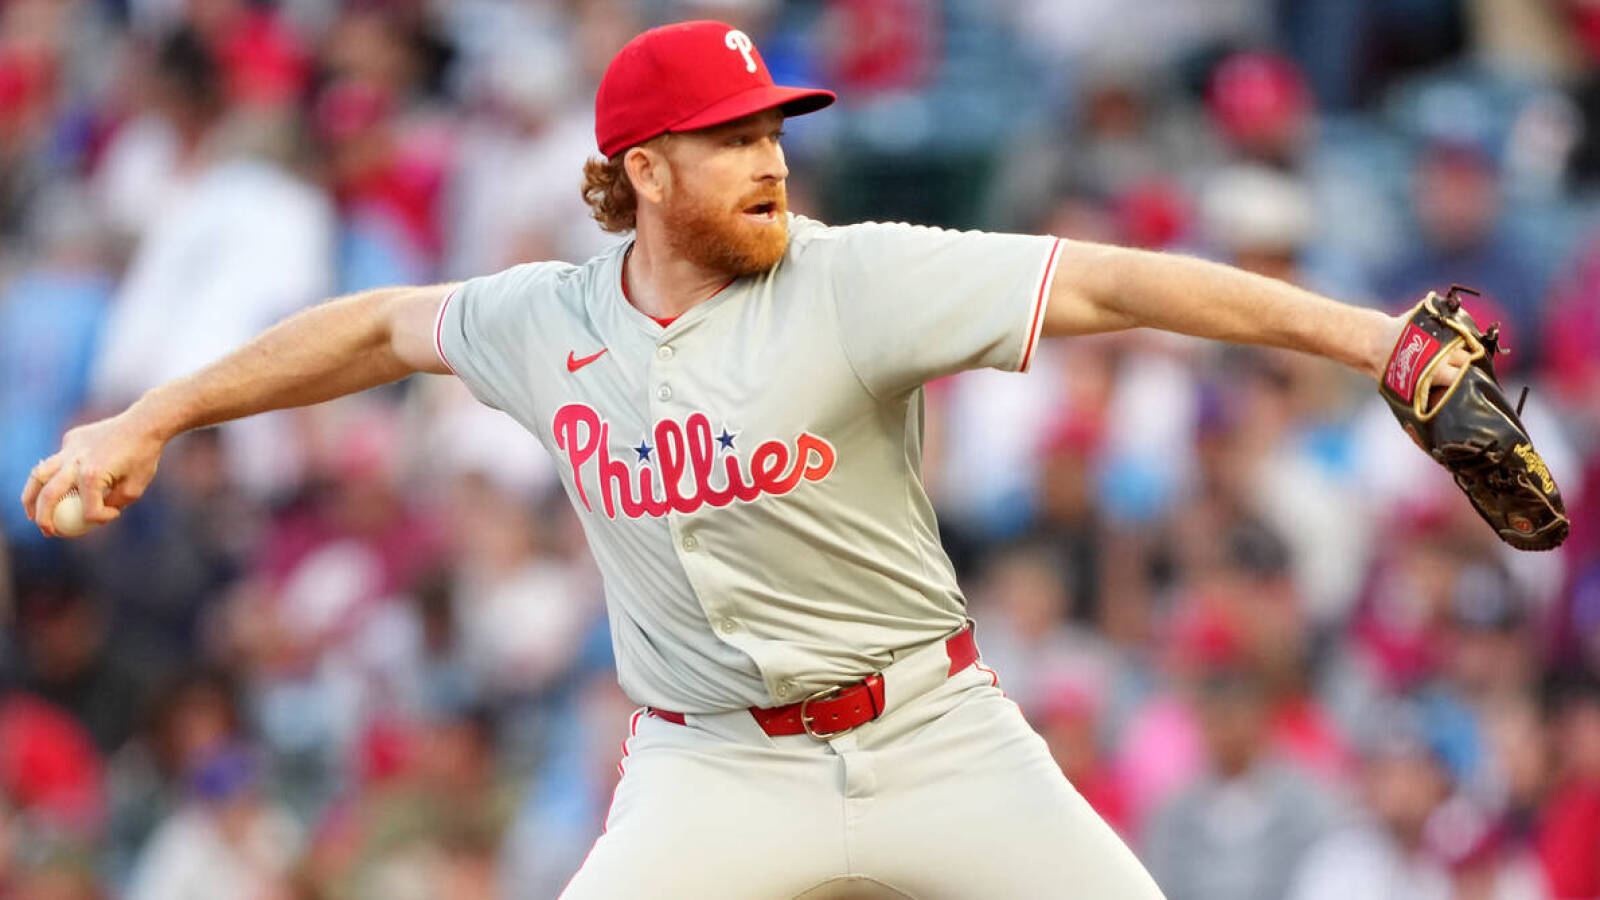 Phillies considering multiple ways to keep Spencer Turnbull in rotation mix